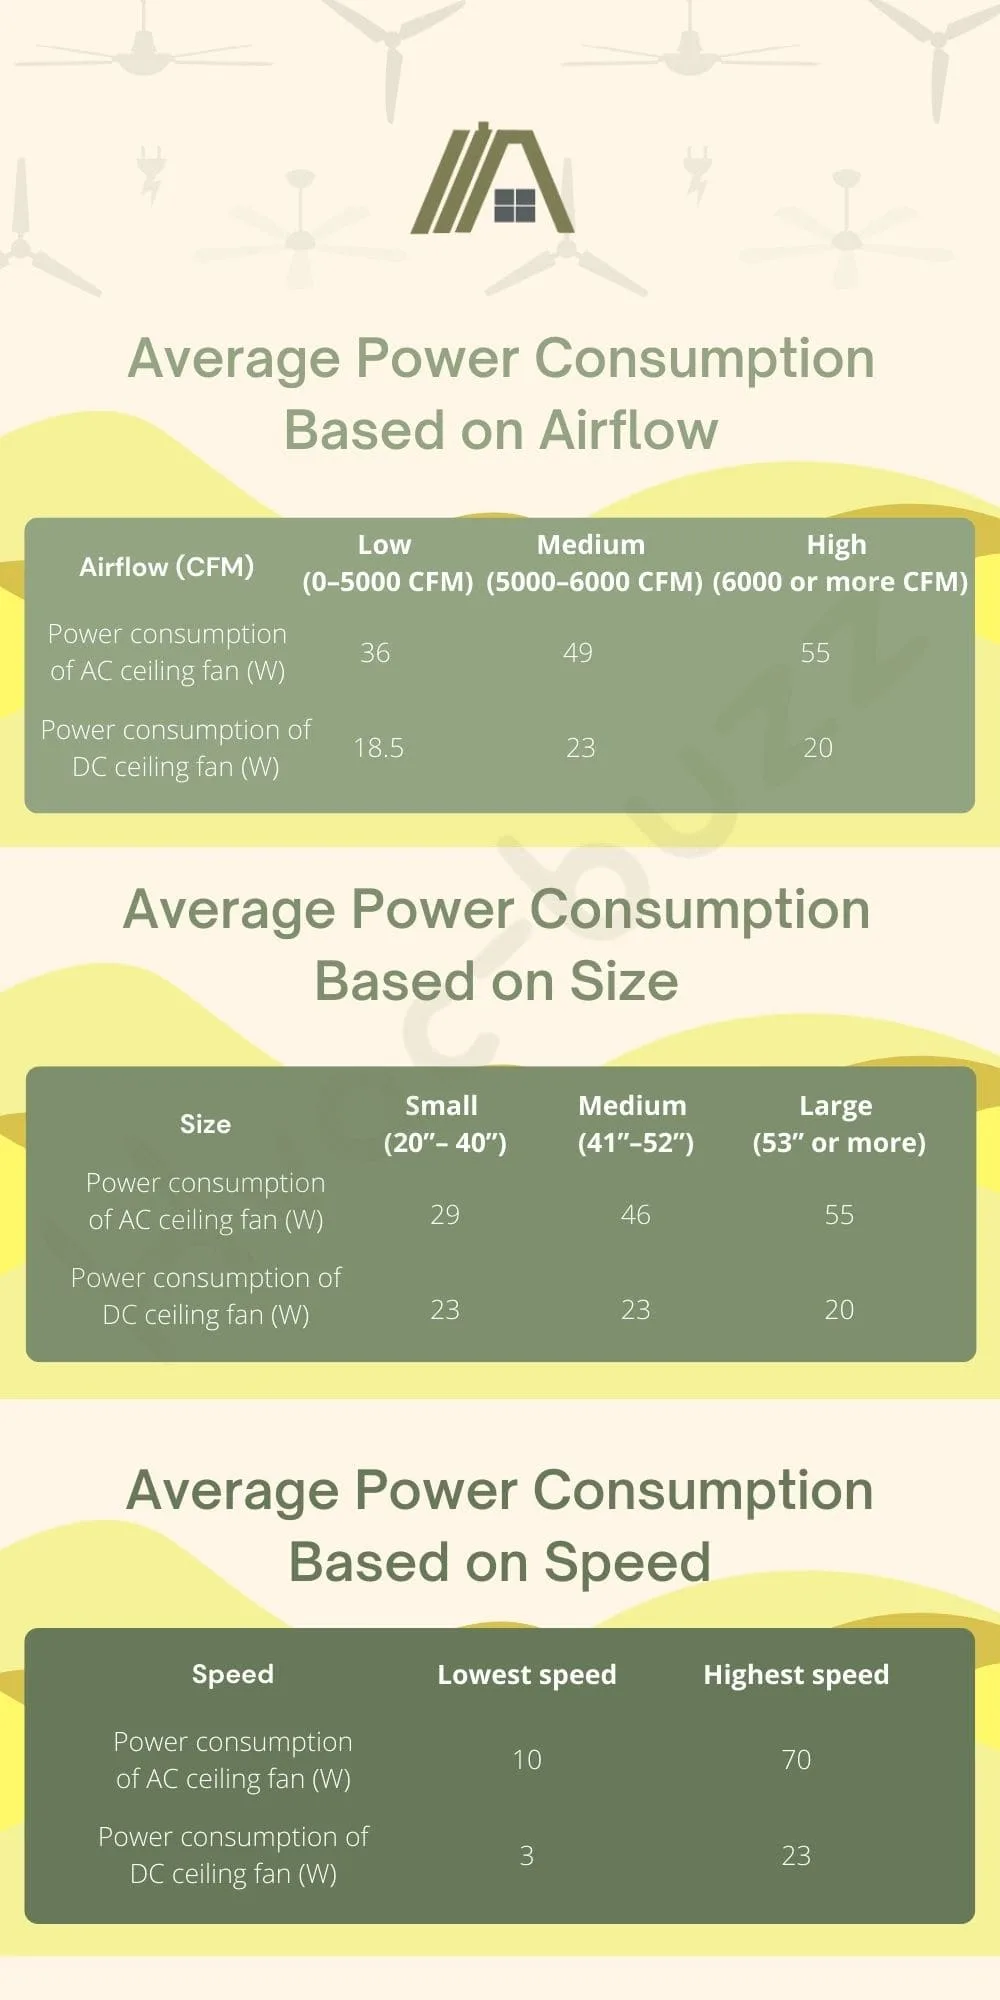 Average Power Consumption of an AC and DC Ceiling Fans based on airflow, size and speed